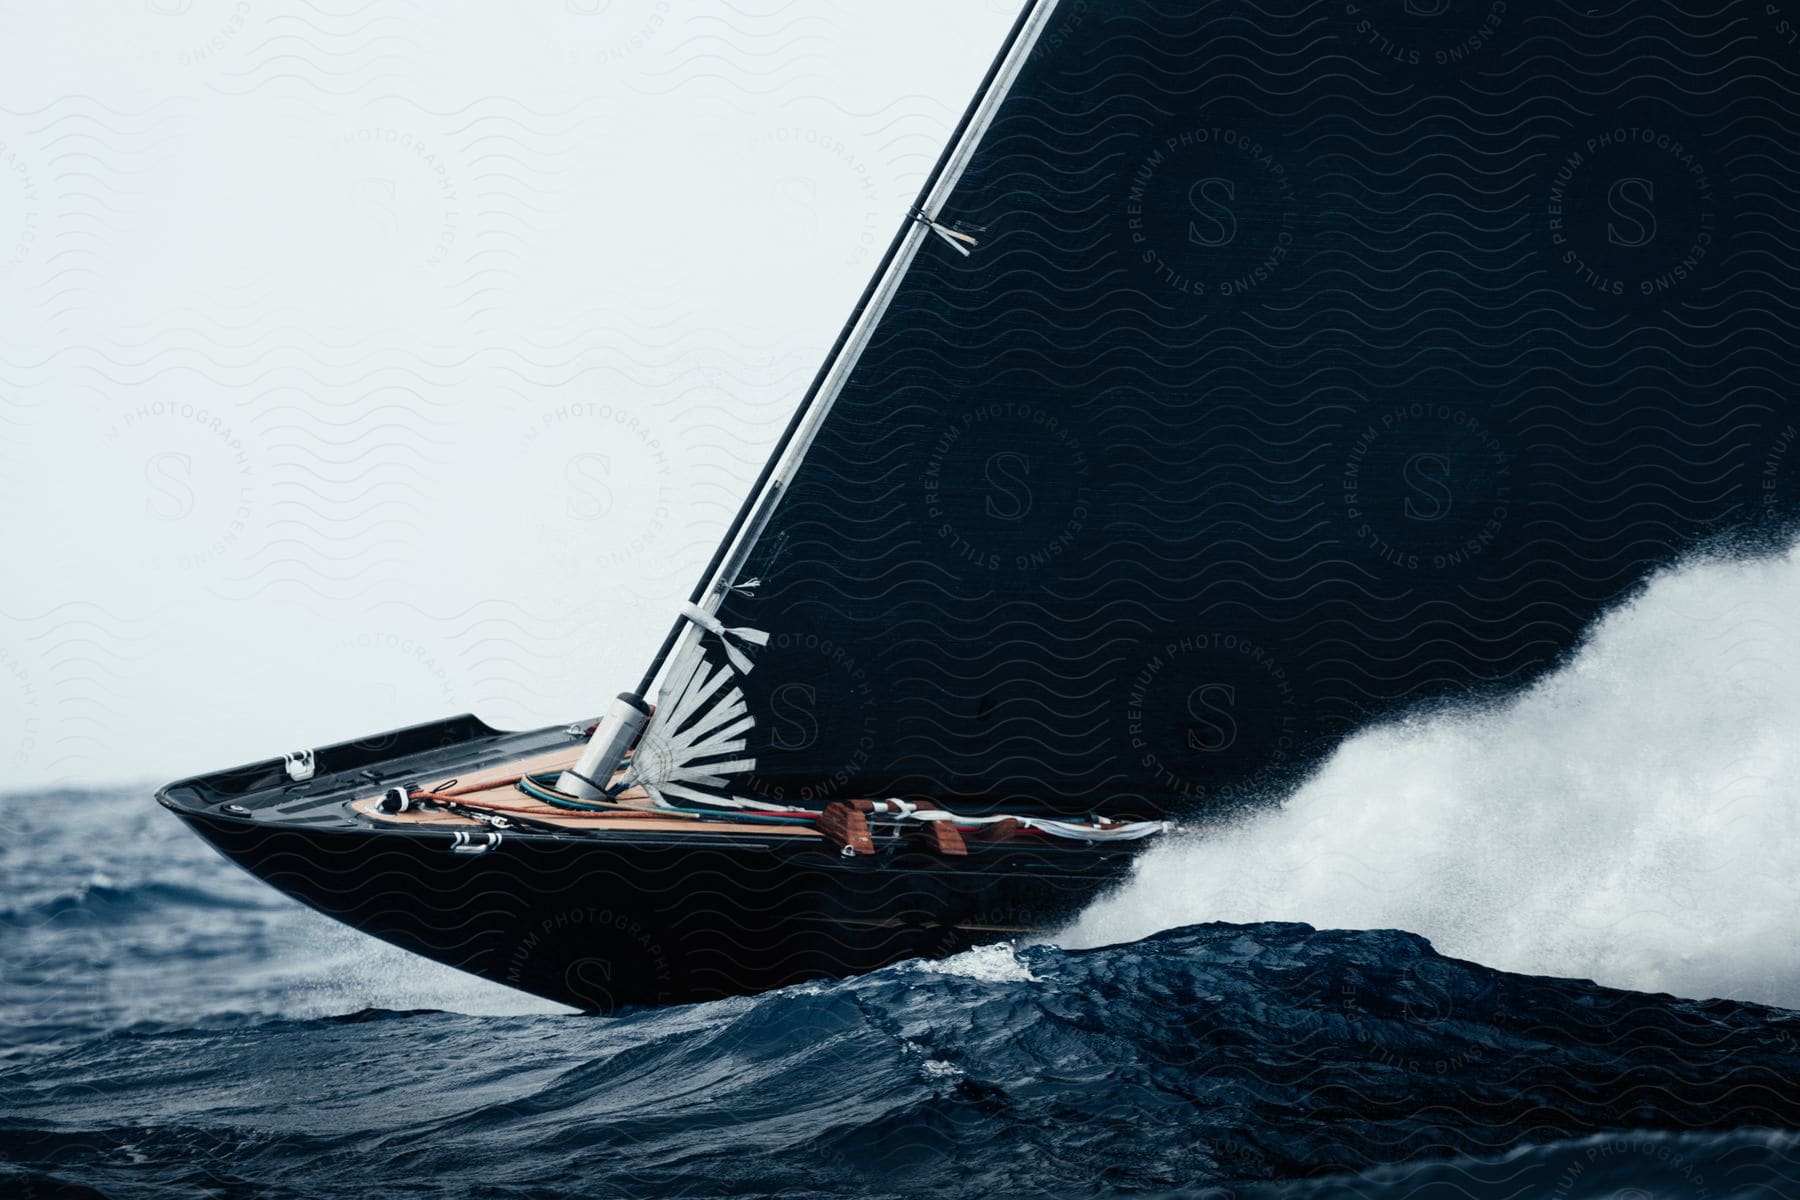 Black sailboat sailing at high speed on the ocean waves